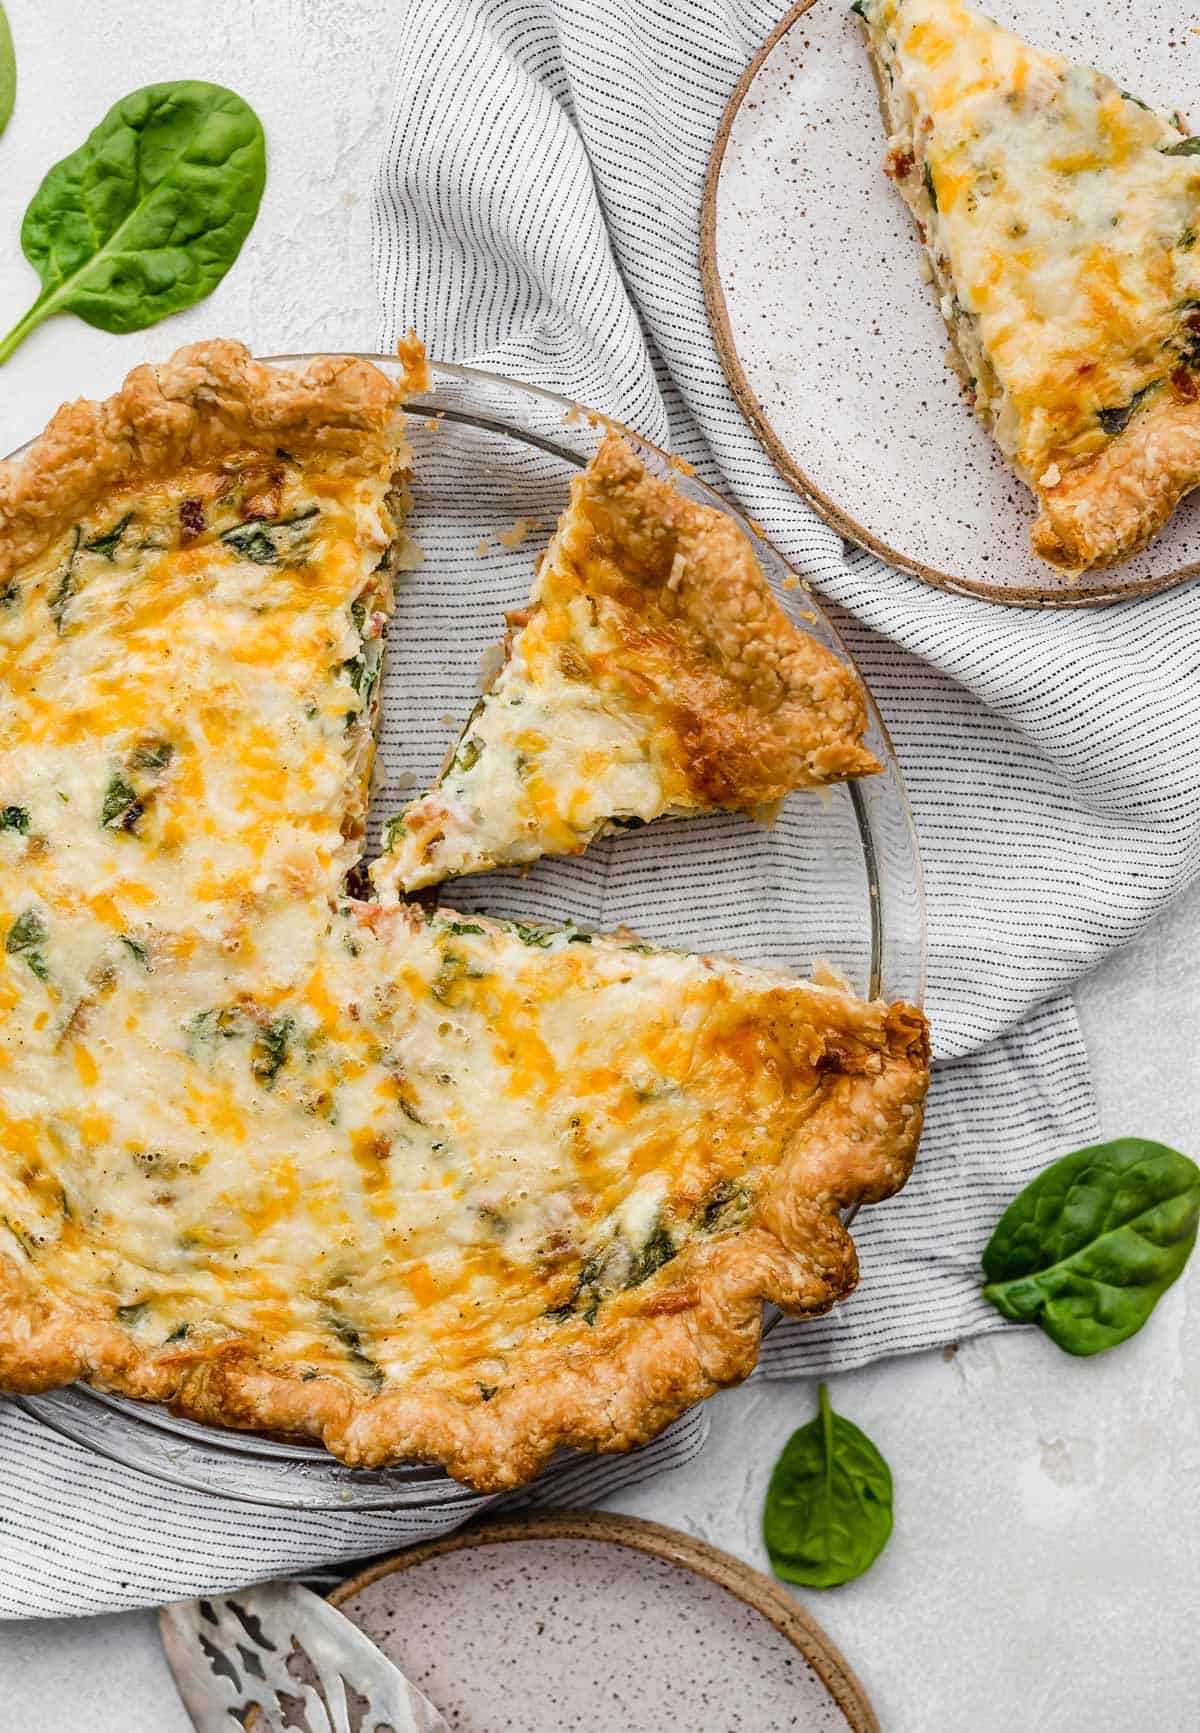 A picture showing a delicious spinach and bacon quiche with a slice cut out.